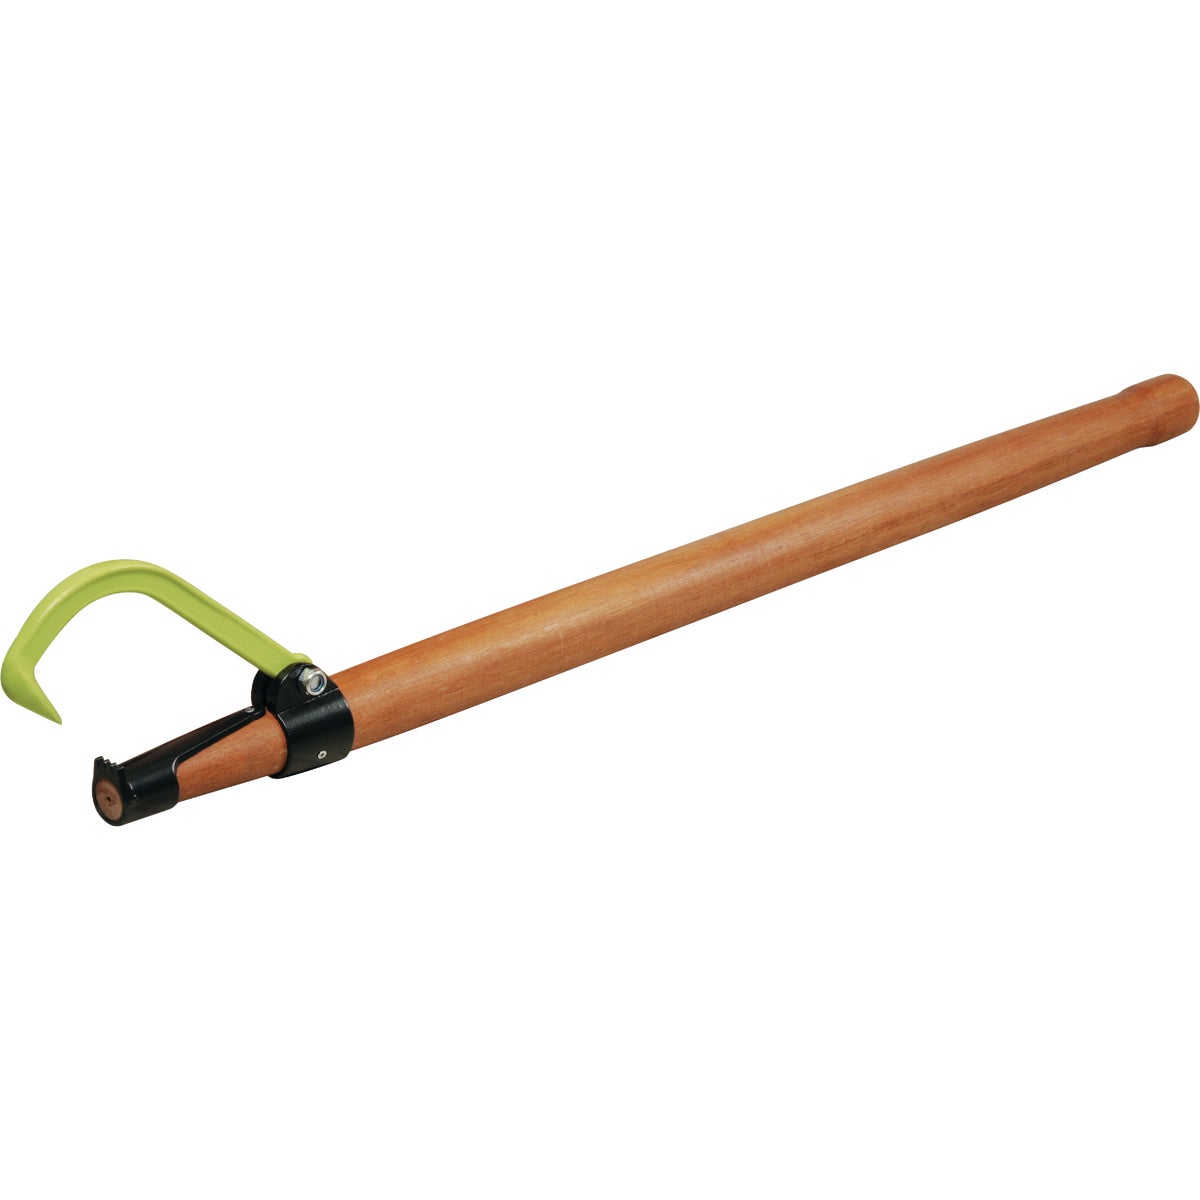 Item 713384, Cant hook has a 1-piece solid 2 In. diameter wood handle.